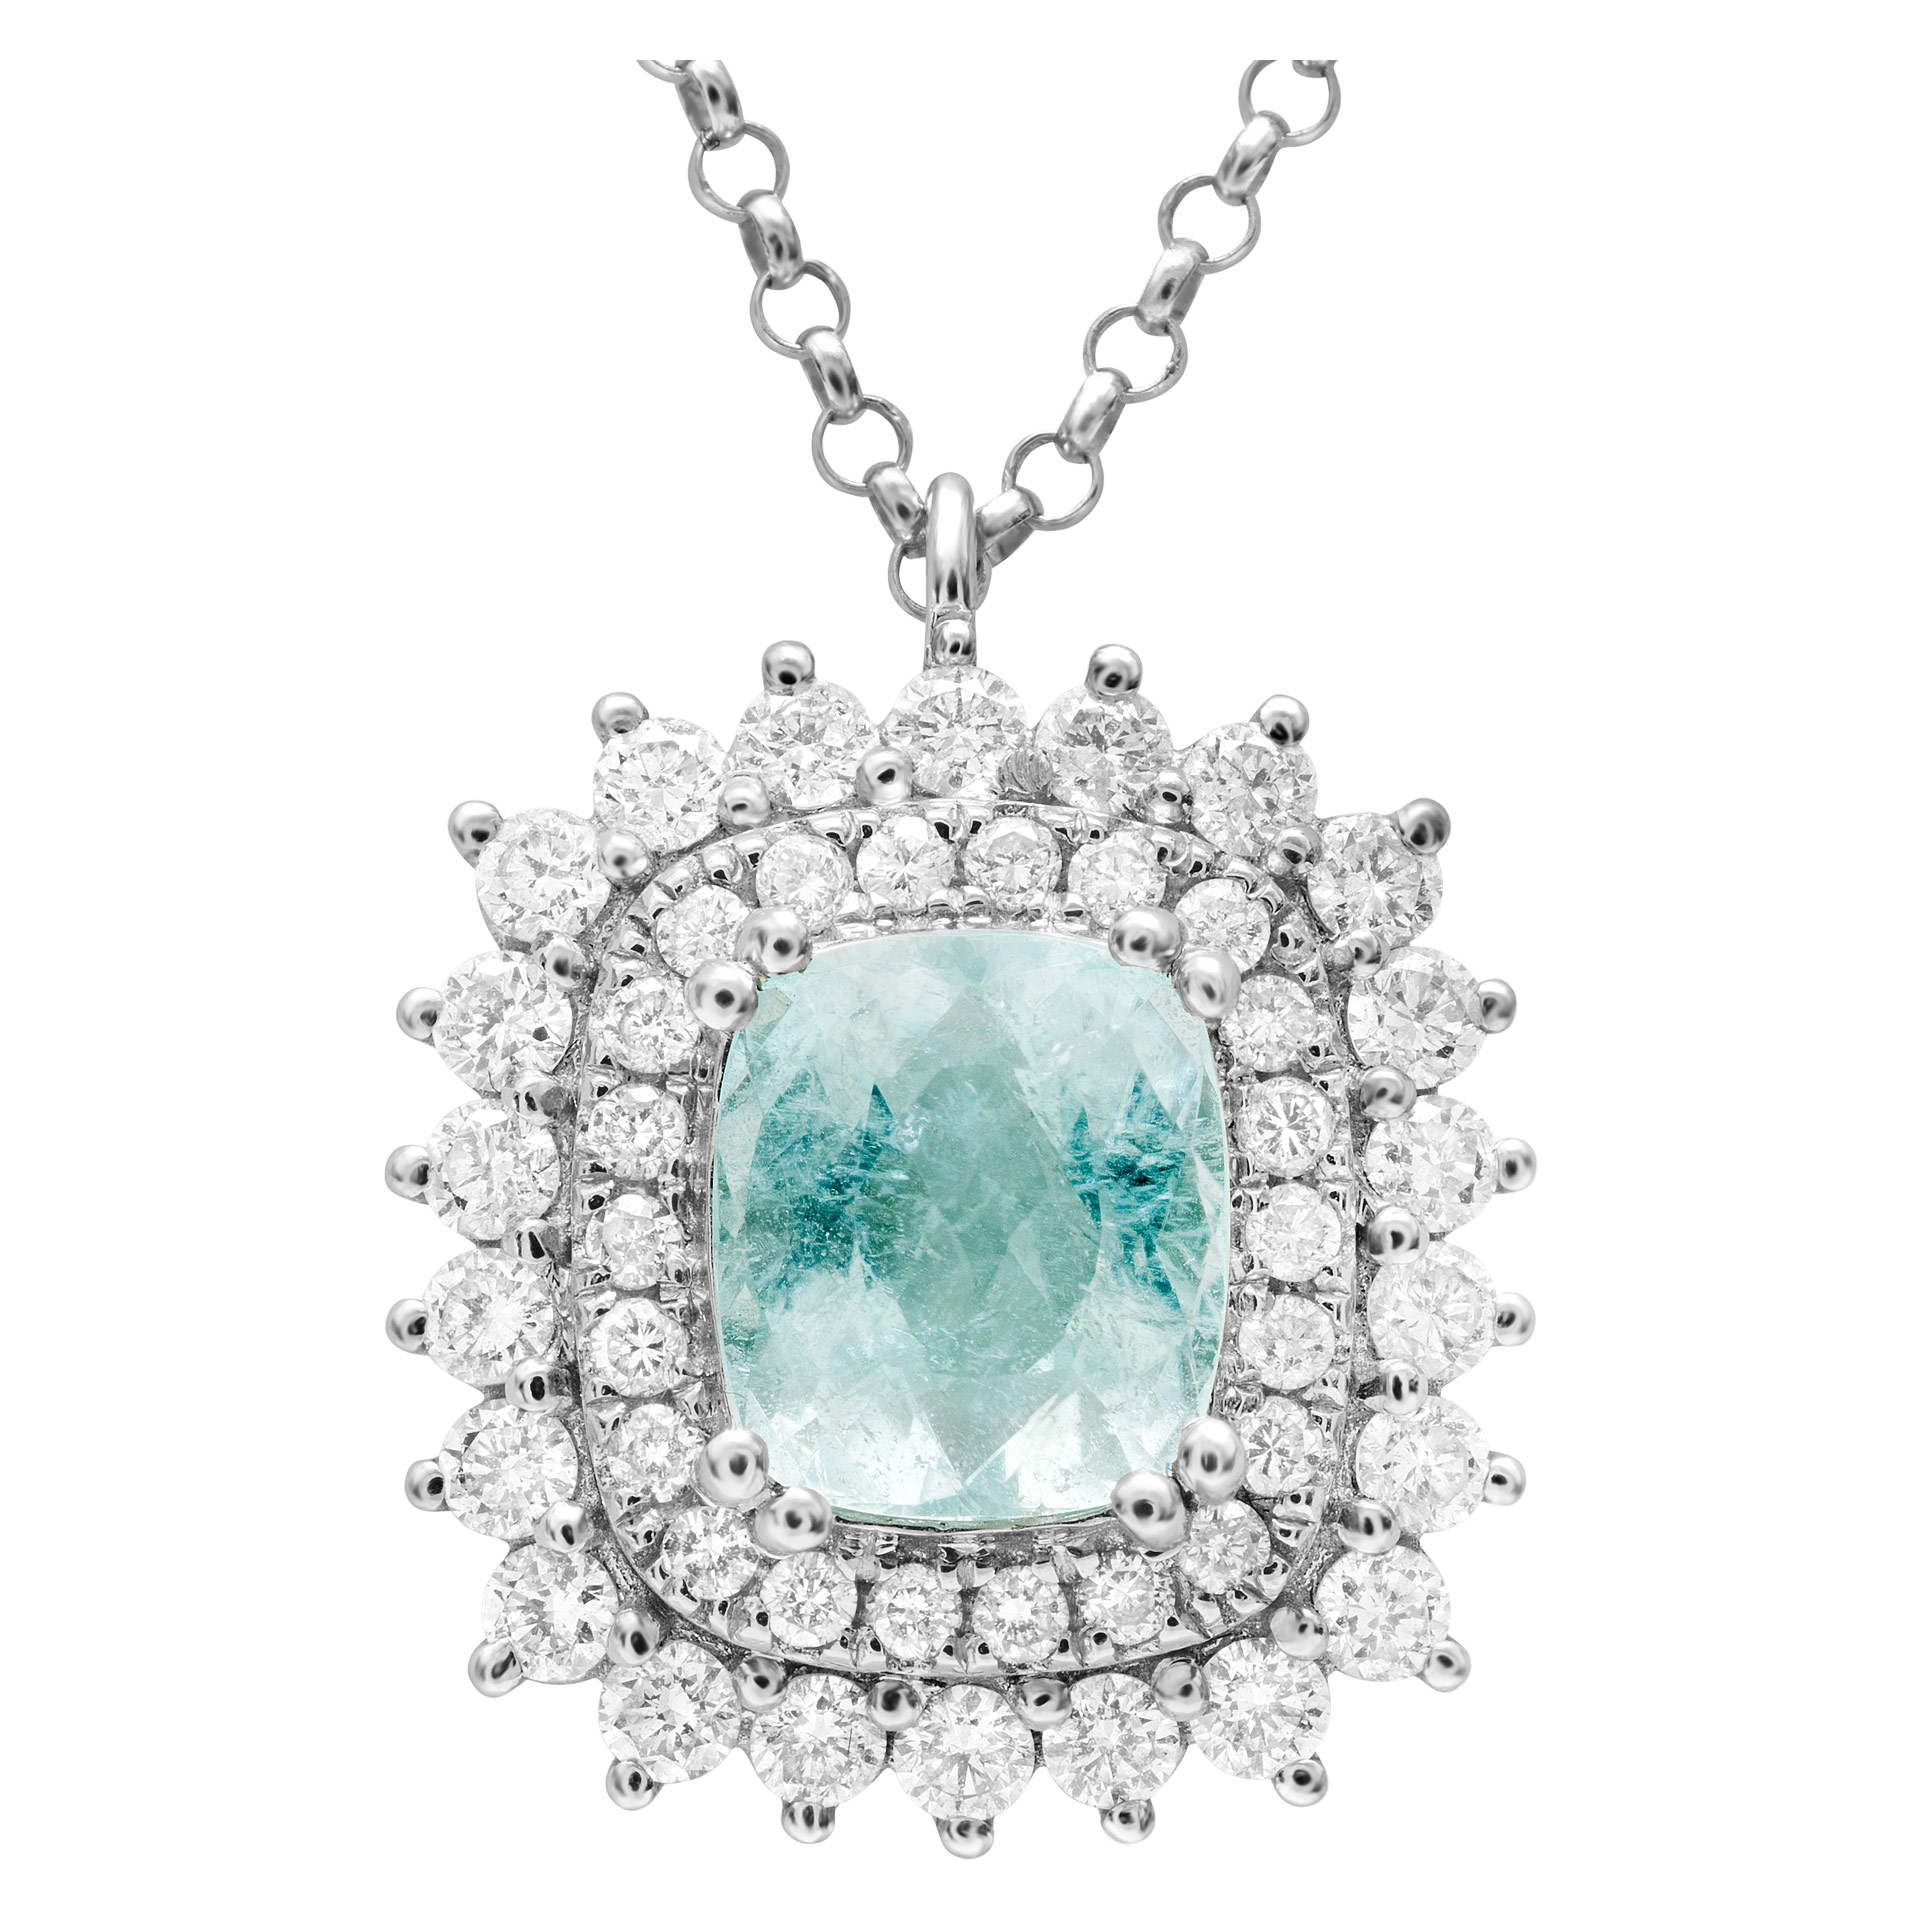 Diamond and Paraiba Tourmaline pendant with chain in 18K WG with 0.63 cts diam & 0.69 cts tourm image 1